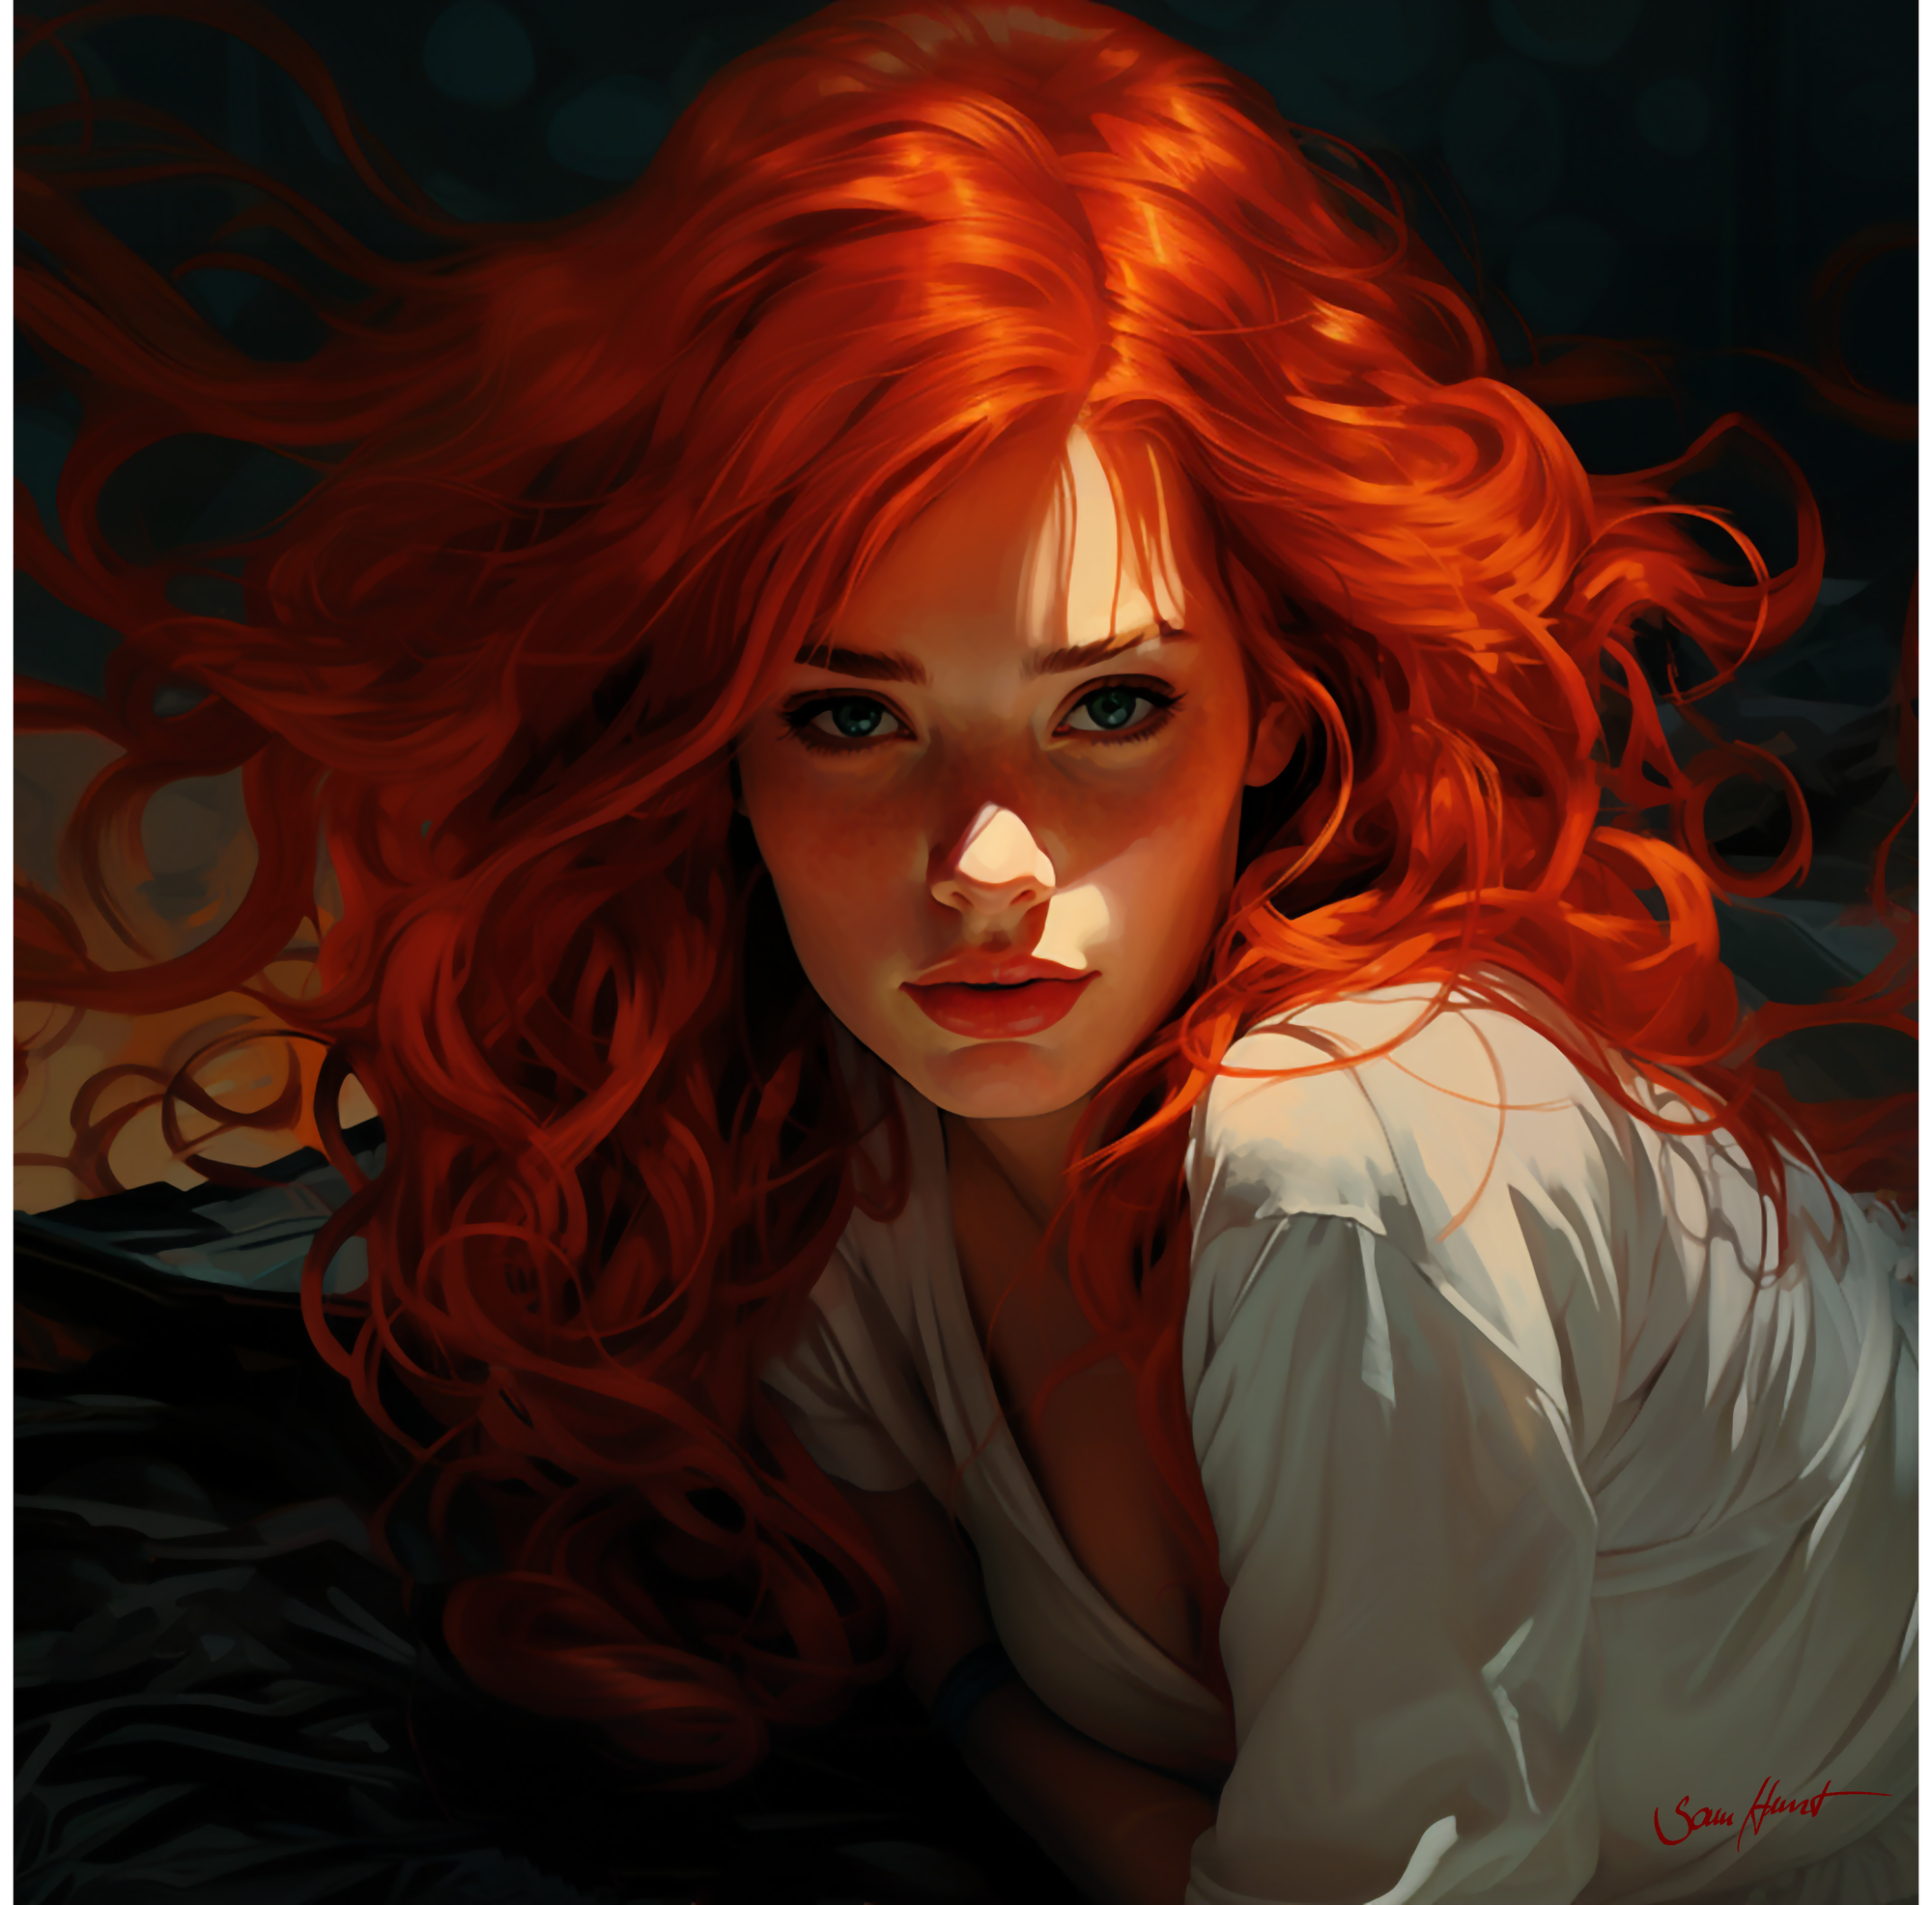 Girl With Red Hair